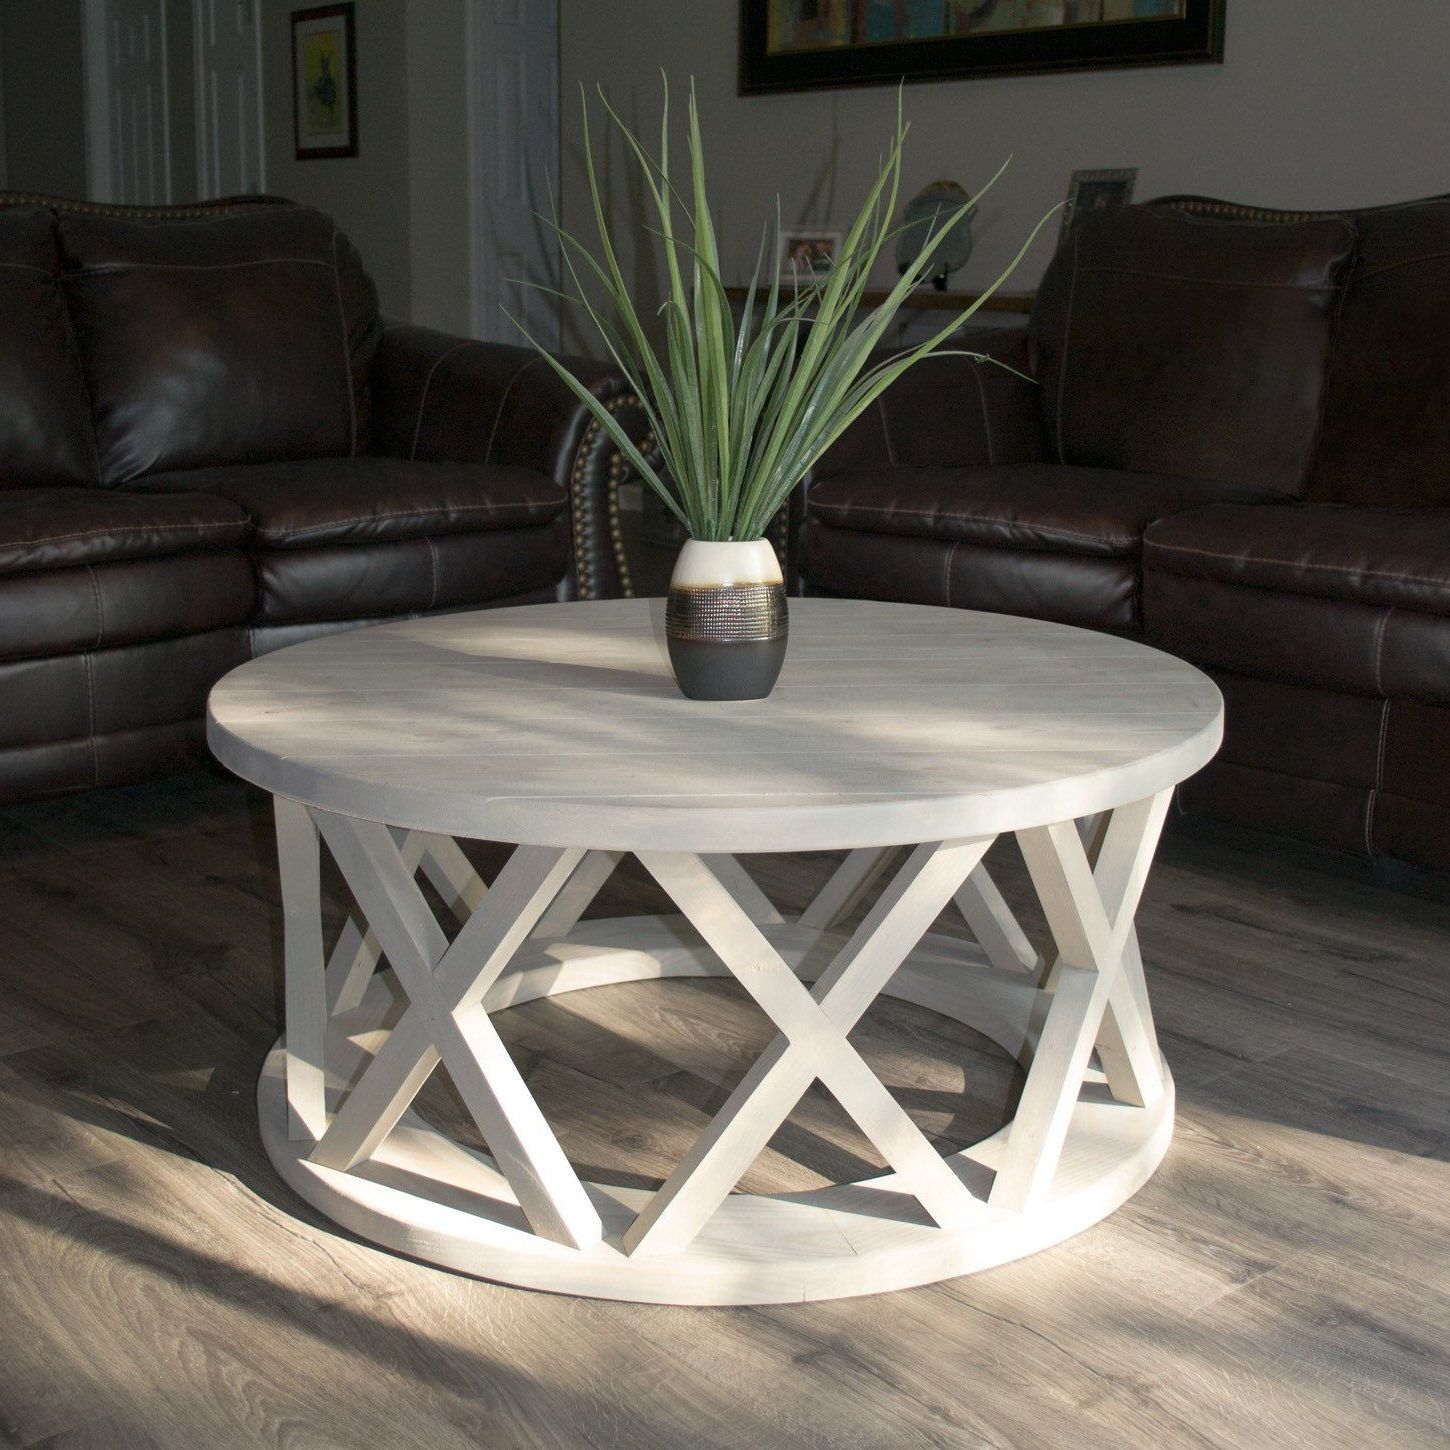 Rustic Wood Coffee Table Round / Harper&bright Designs Industrial Big With White T Base Seminar Coffee Tables (Gallery 16 of 20)